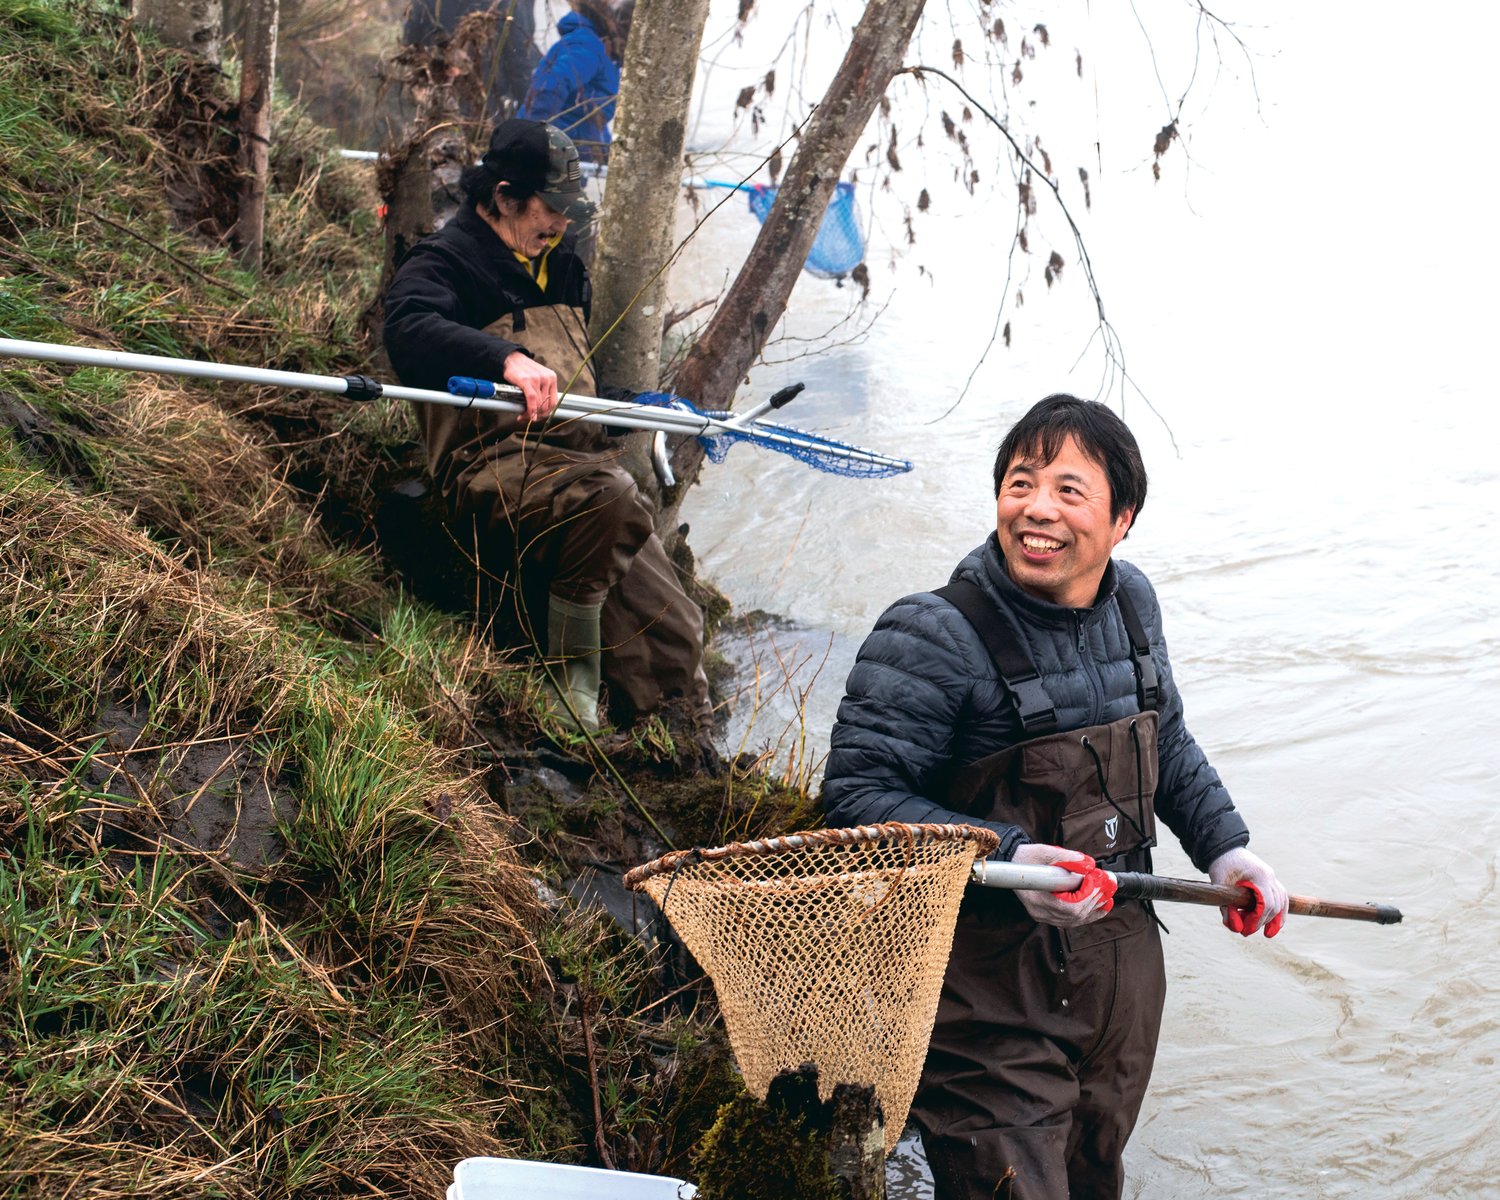 Xianping Tong smiles while dipping his net into the Cowlitz River Saturday morning in Castle Rock.